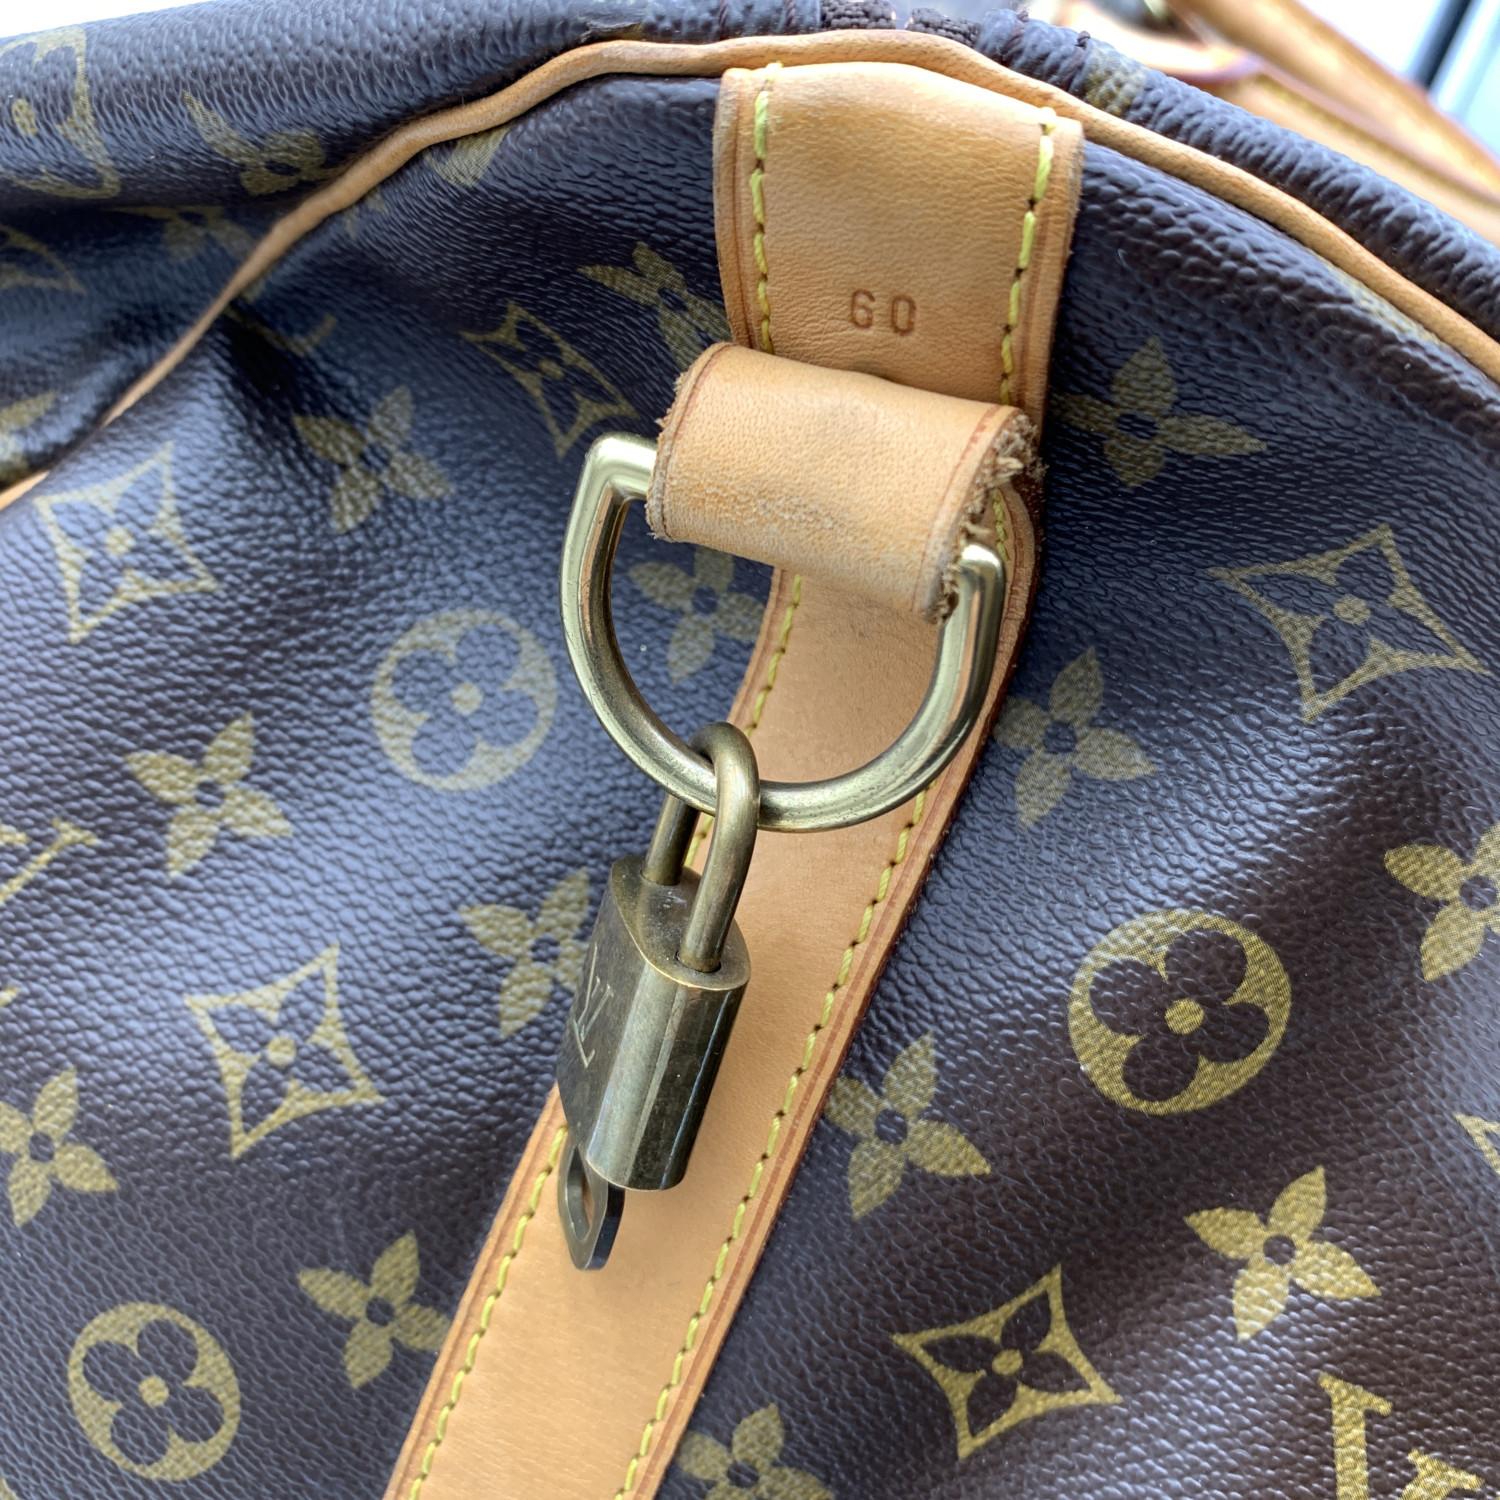 Louis Vuitton Monogram Keepall 60 Travel Large Duffle Bag M41412 In Good Condition For Sale In Rome, Rome